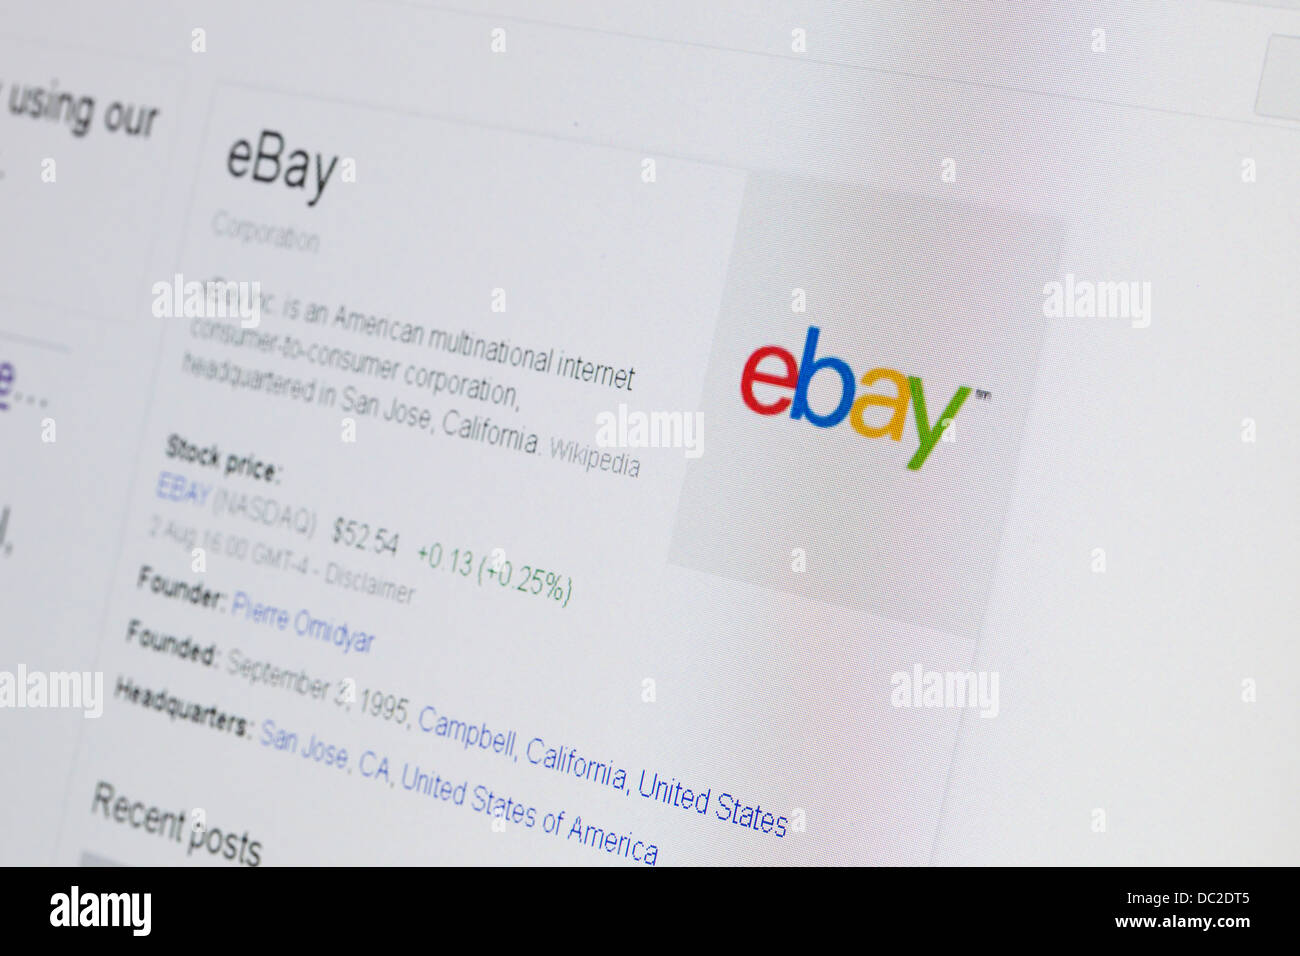 ebay browser information and logo Stock Photo